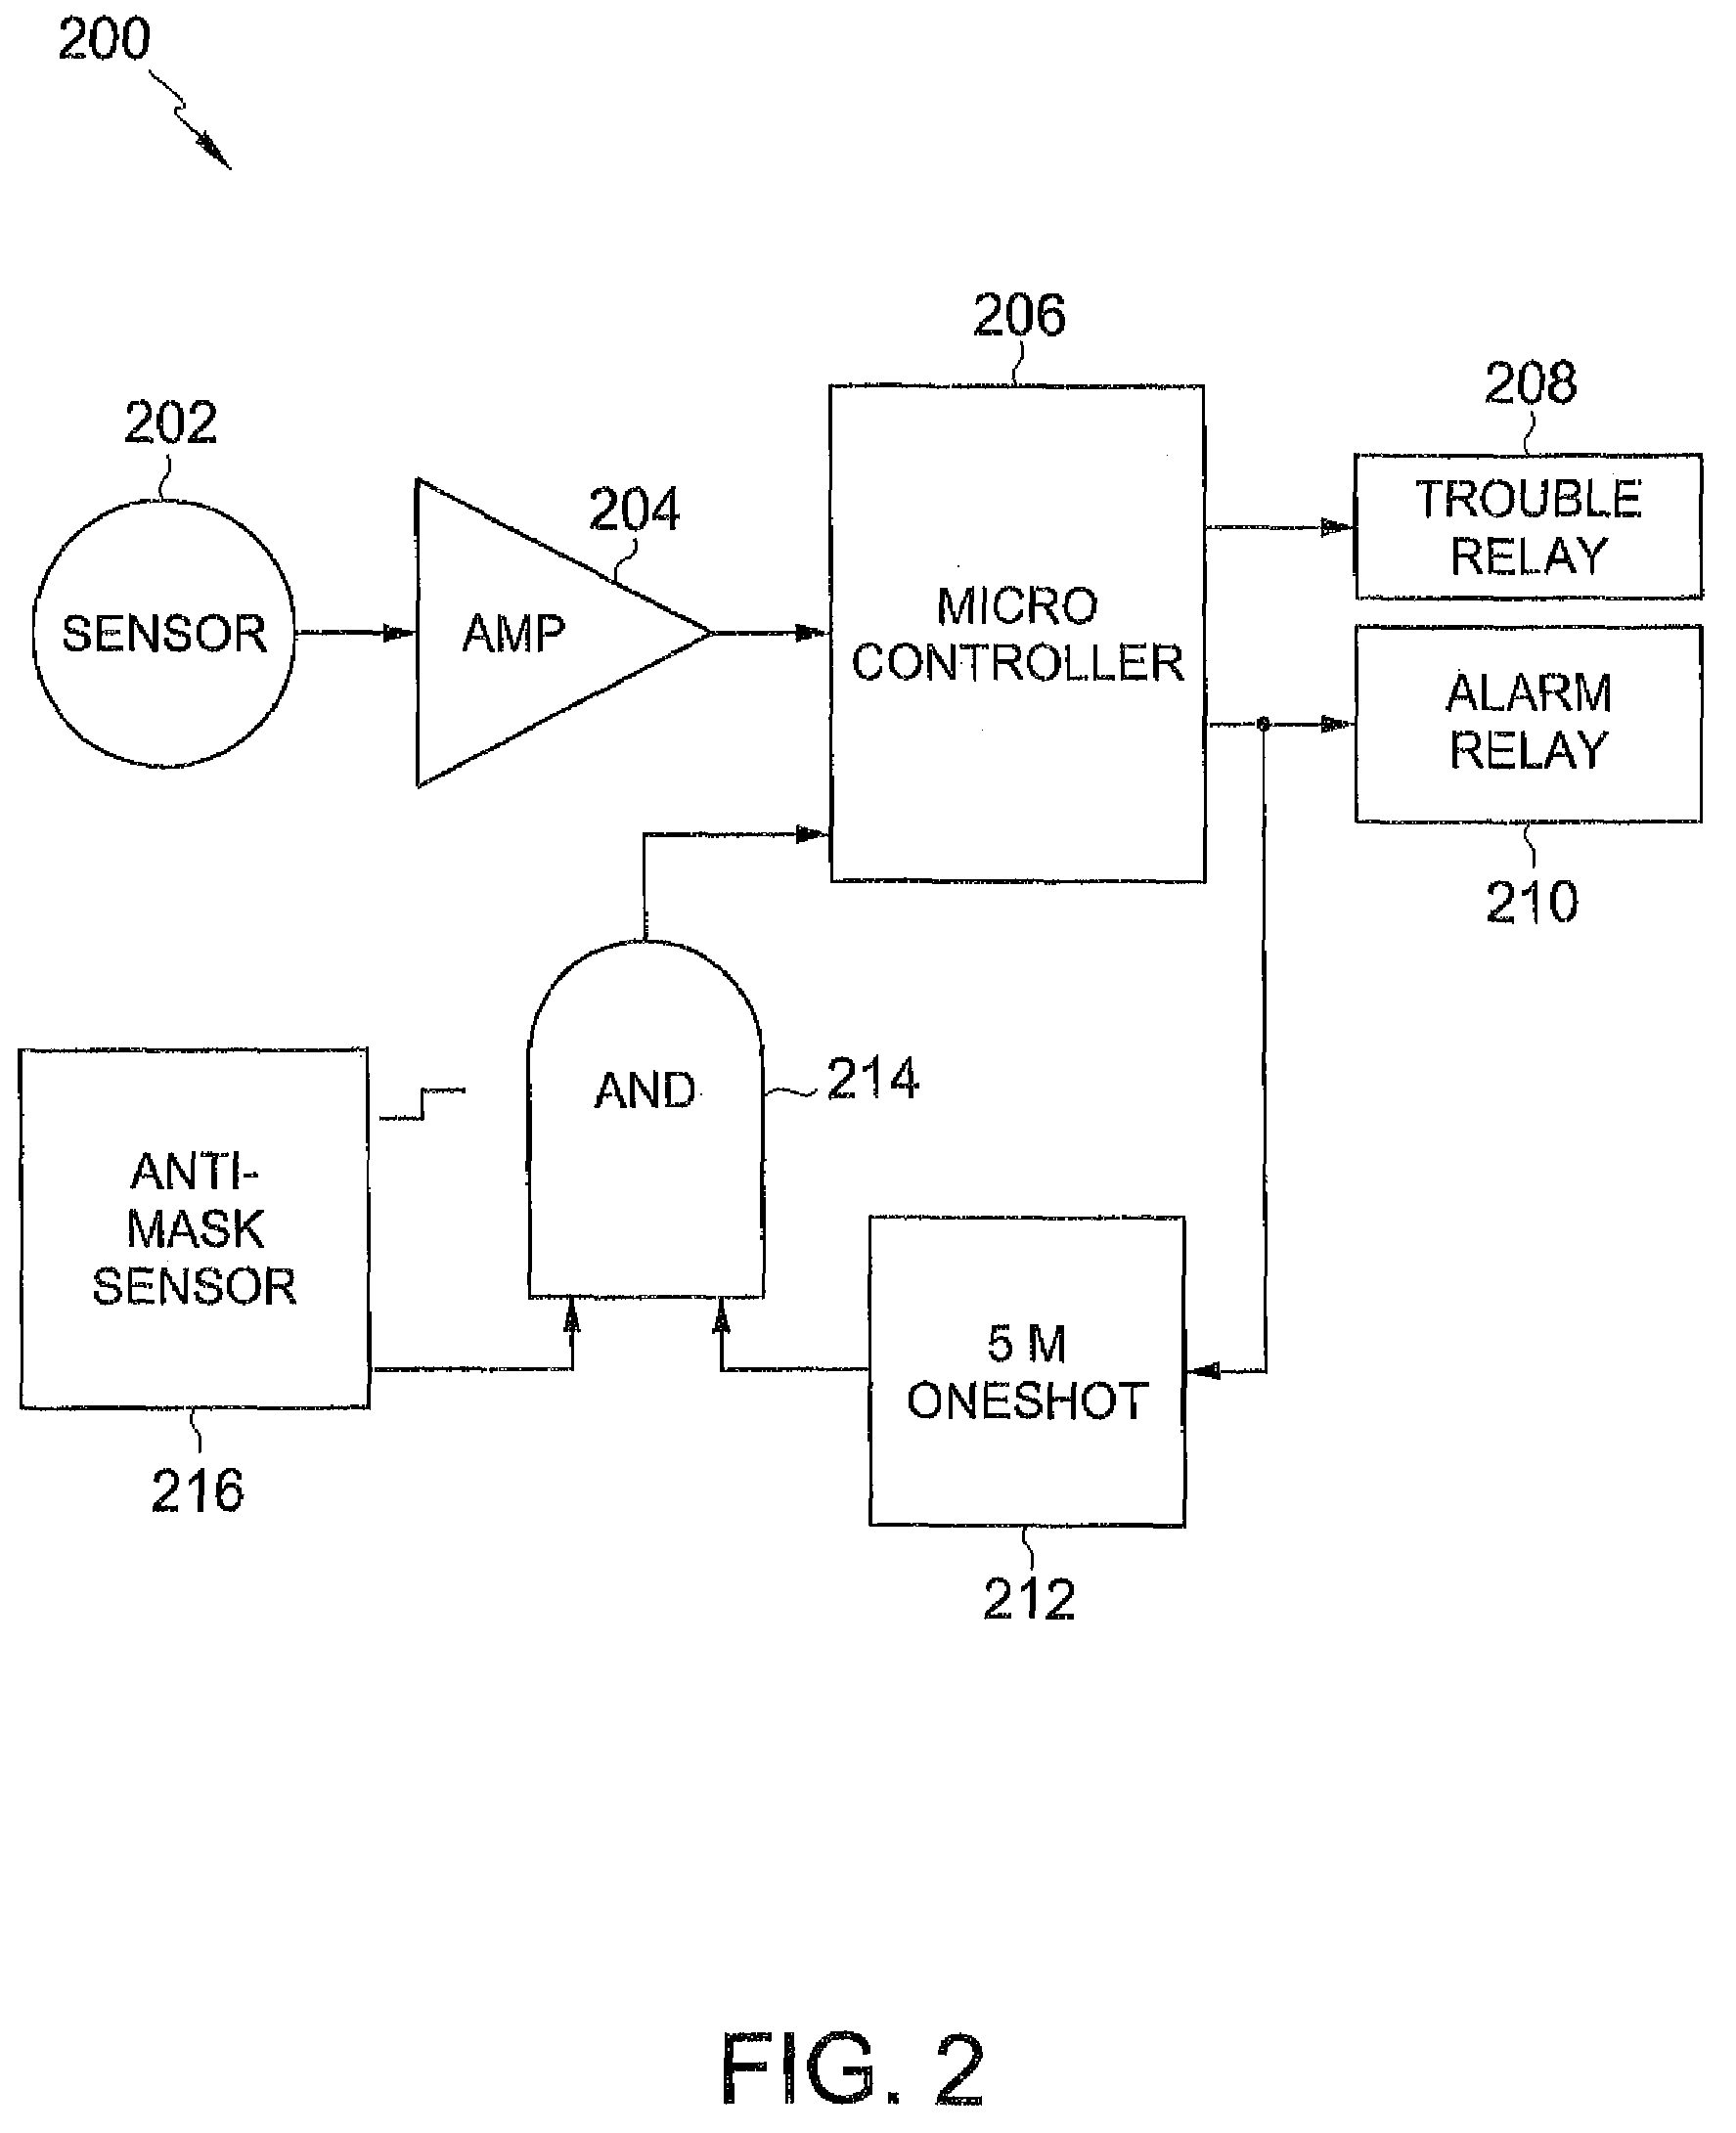 System and method for controlling an anti-masking system